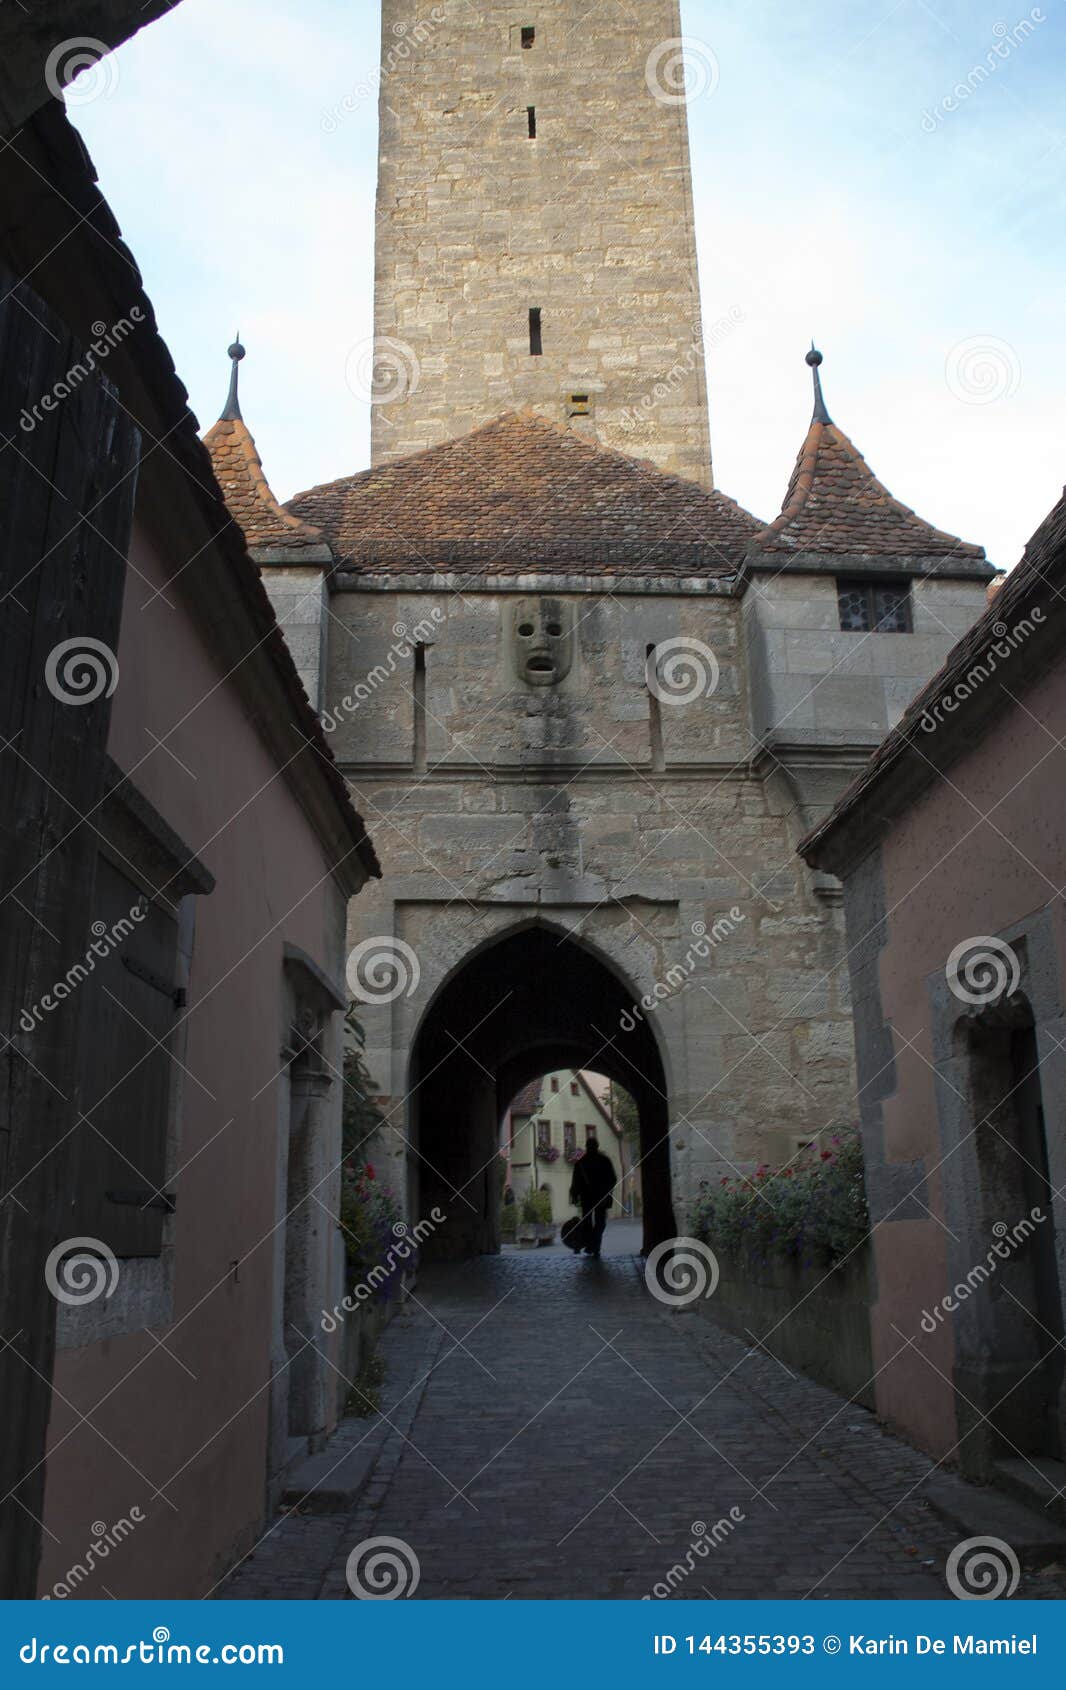 cobblestone street and burgtor or castle gate